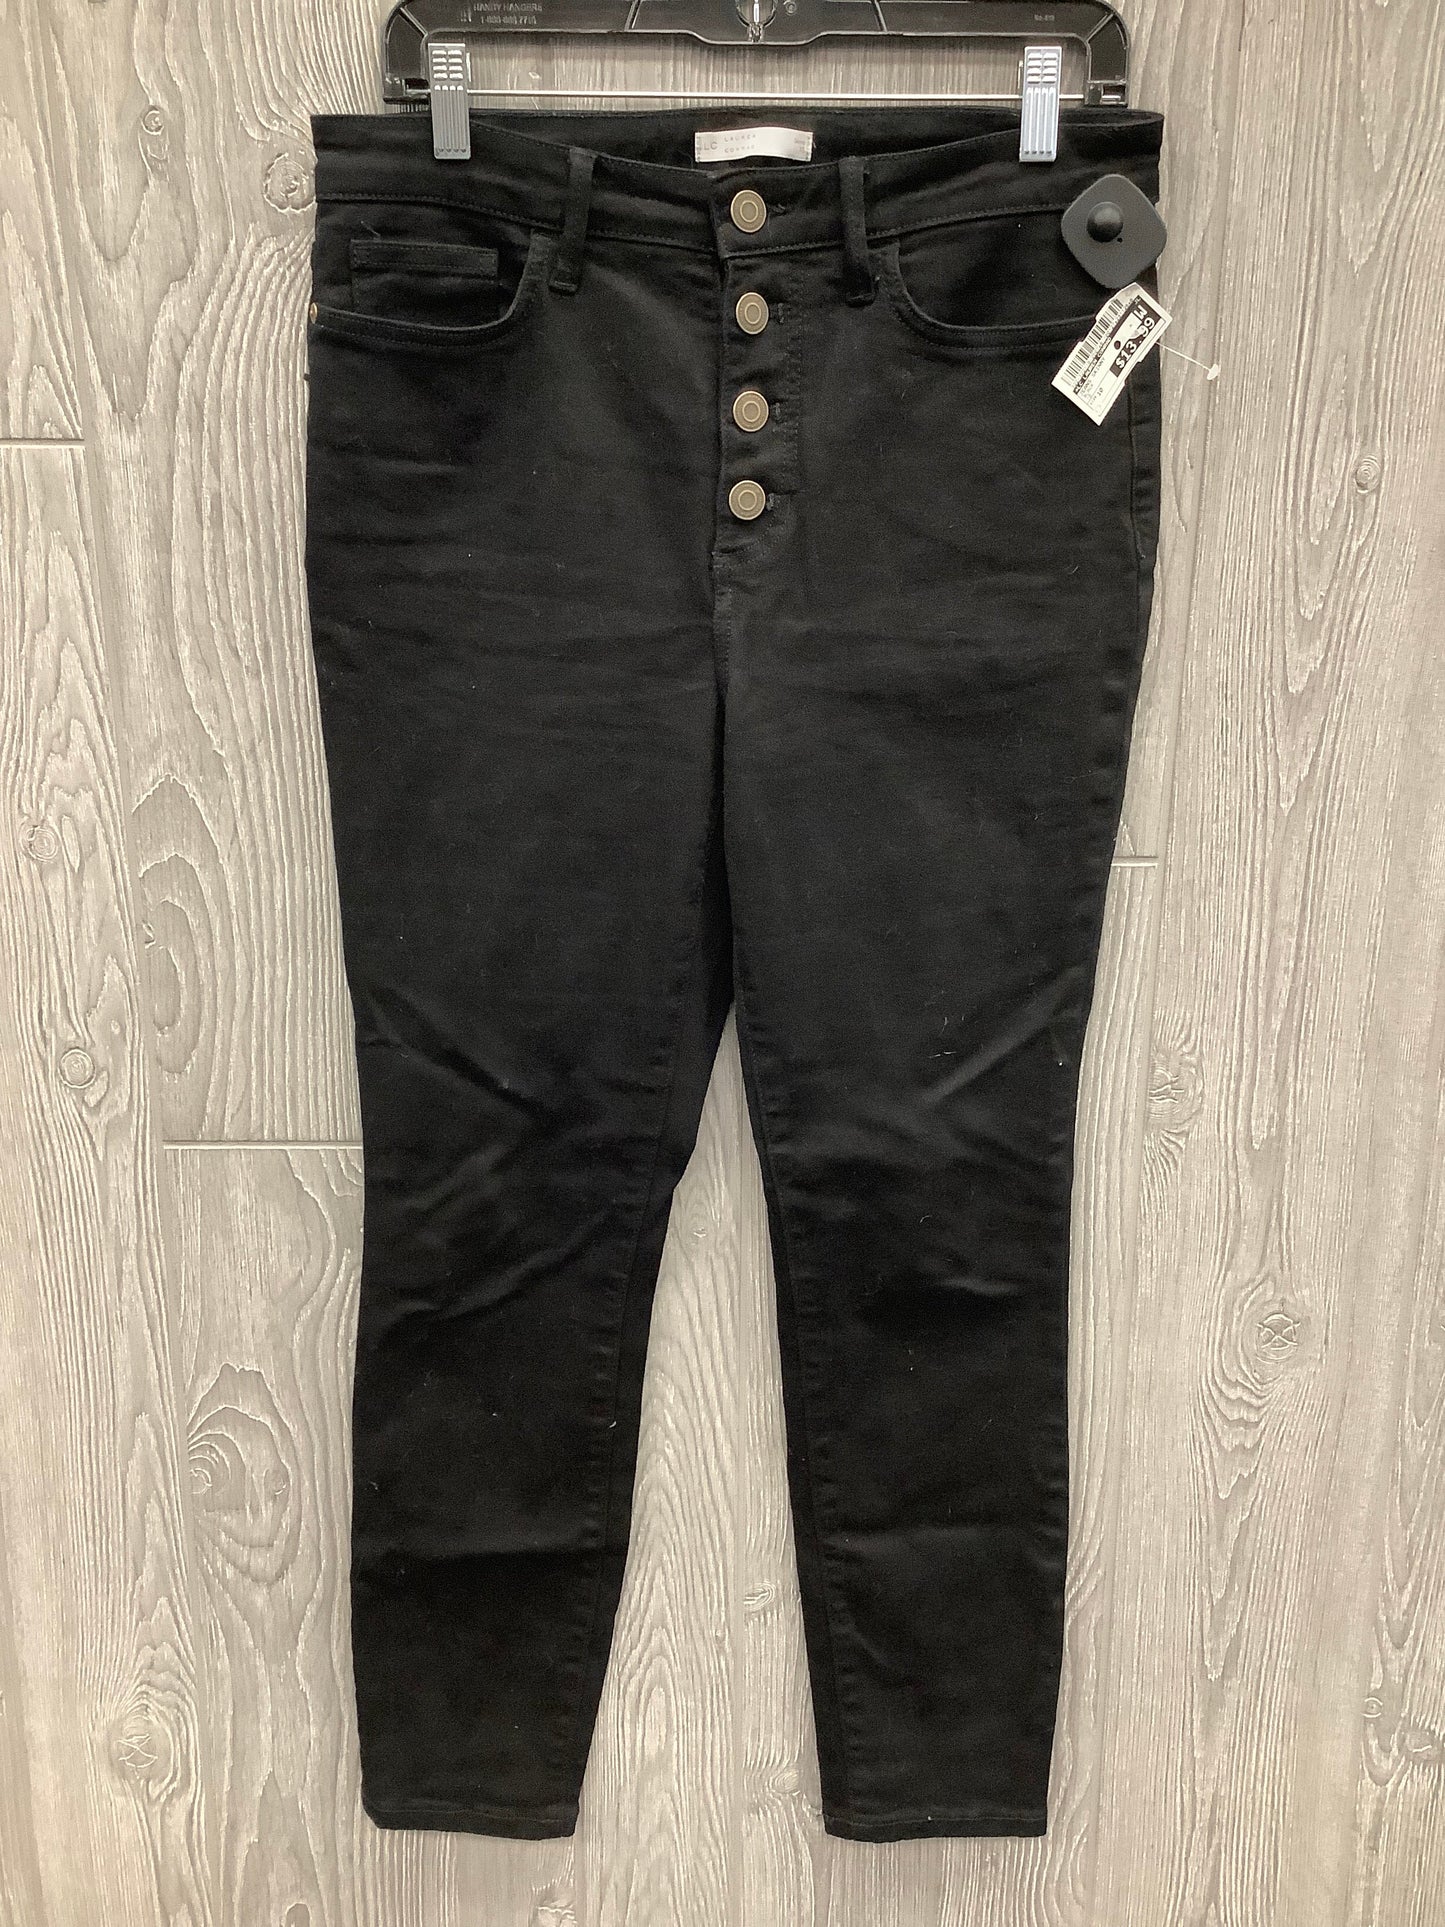 Jeans Skinny By Lc Lauren Conrad  Size: 10